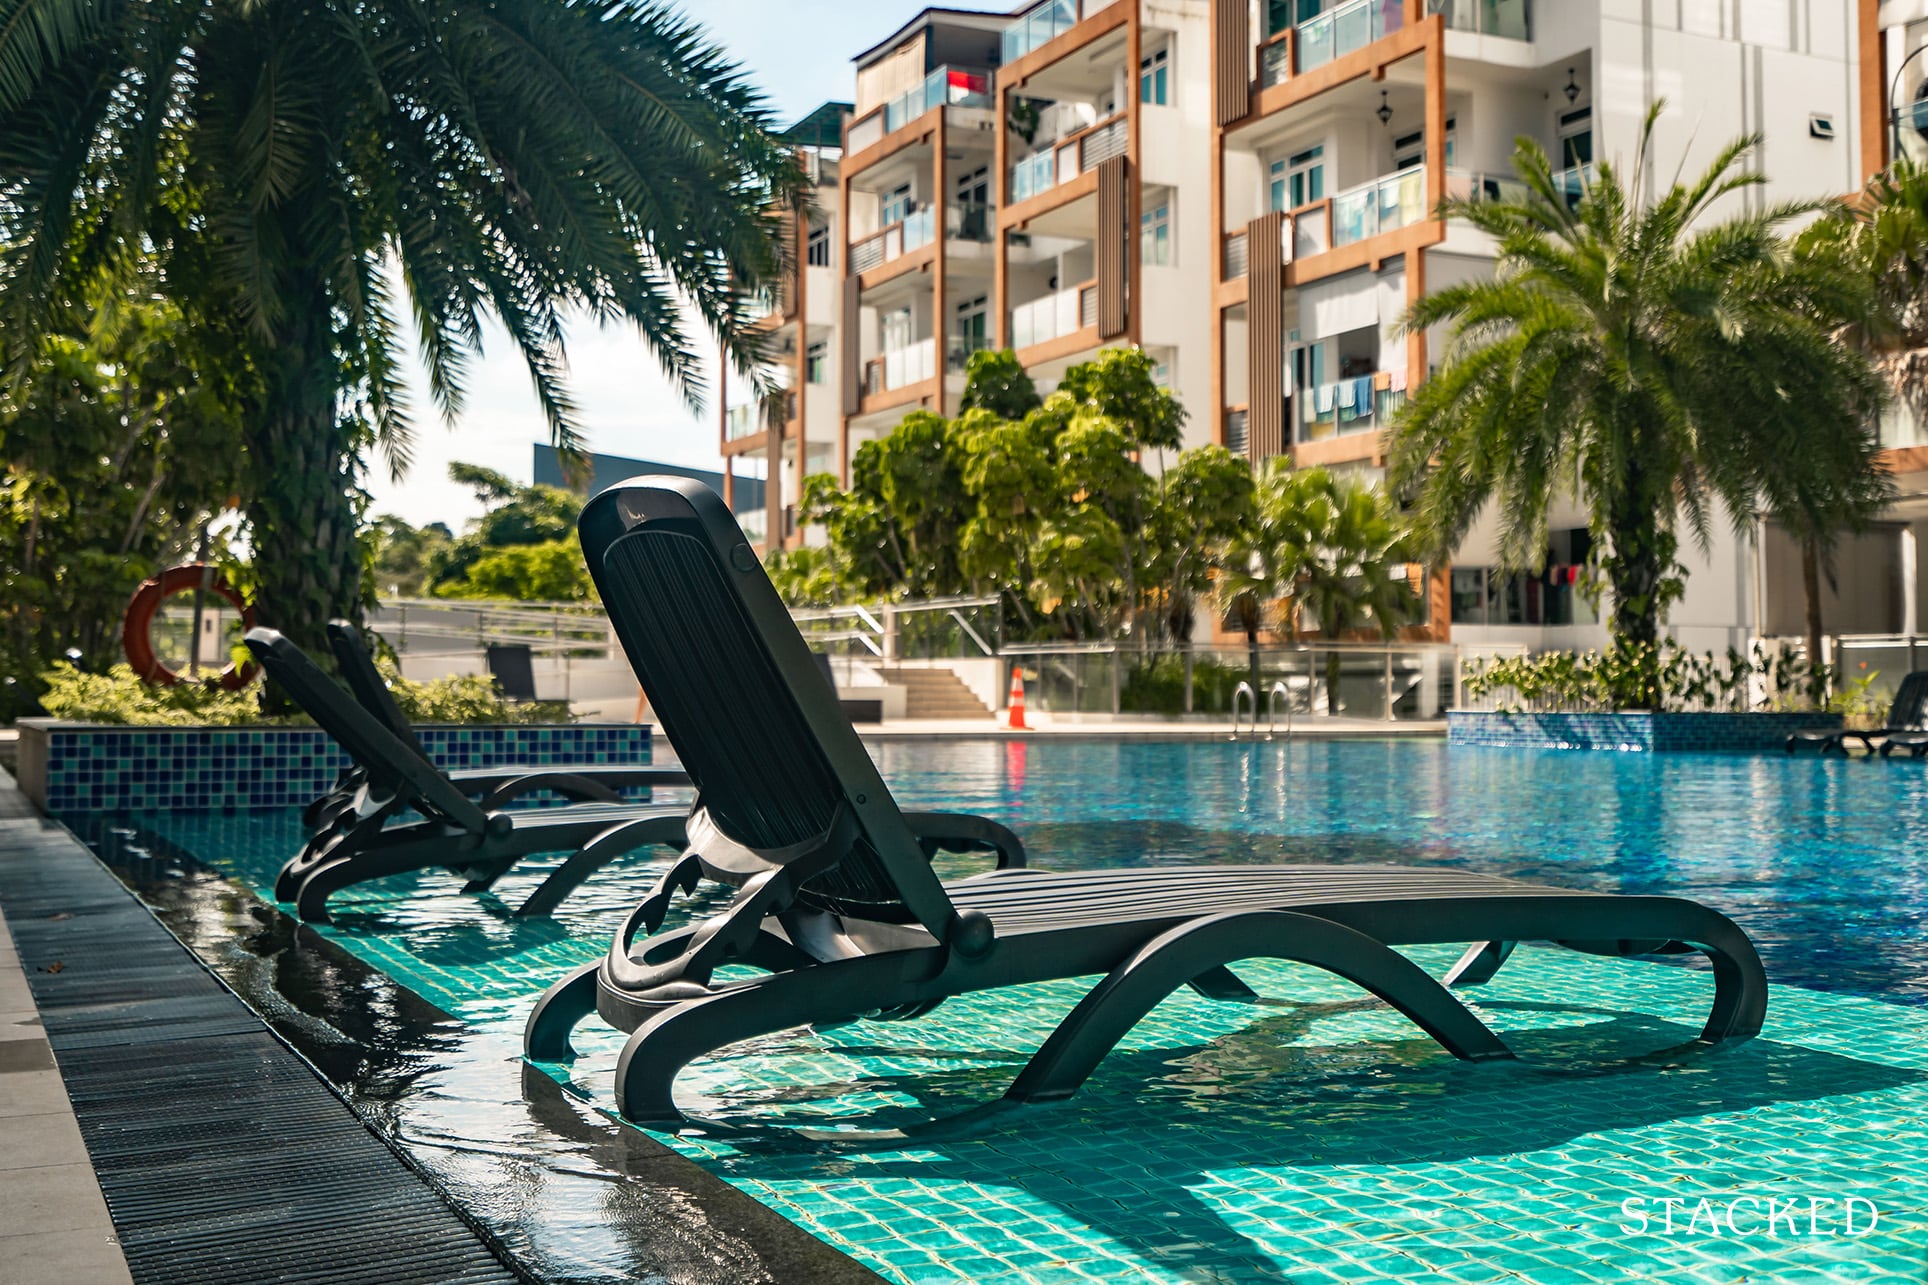 parc rosewood deck chairs swimming pool